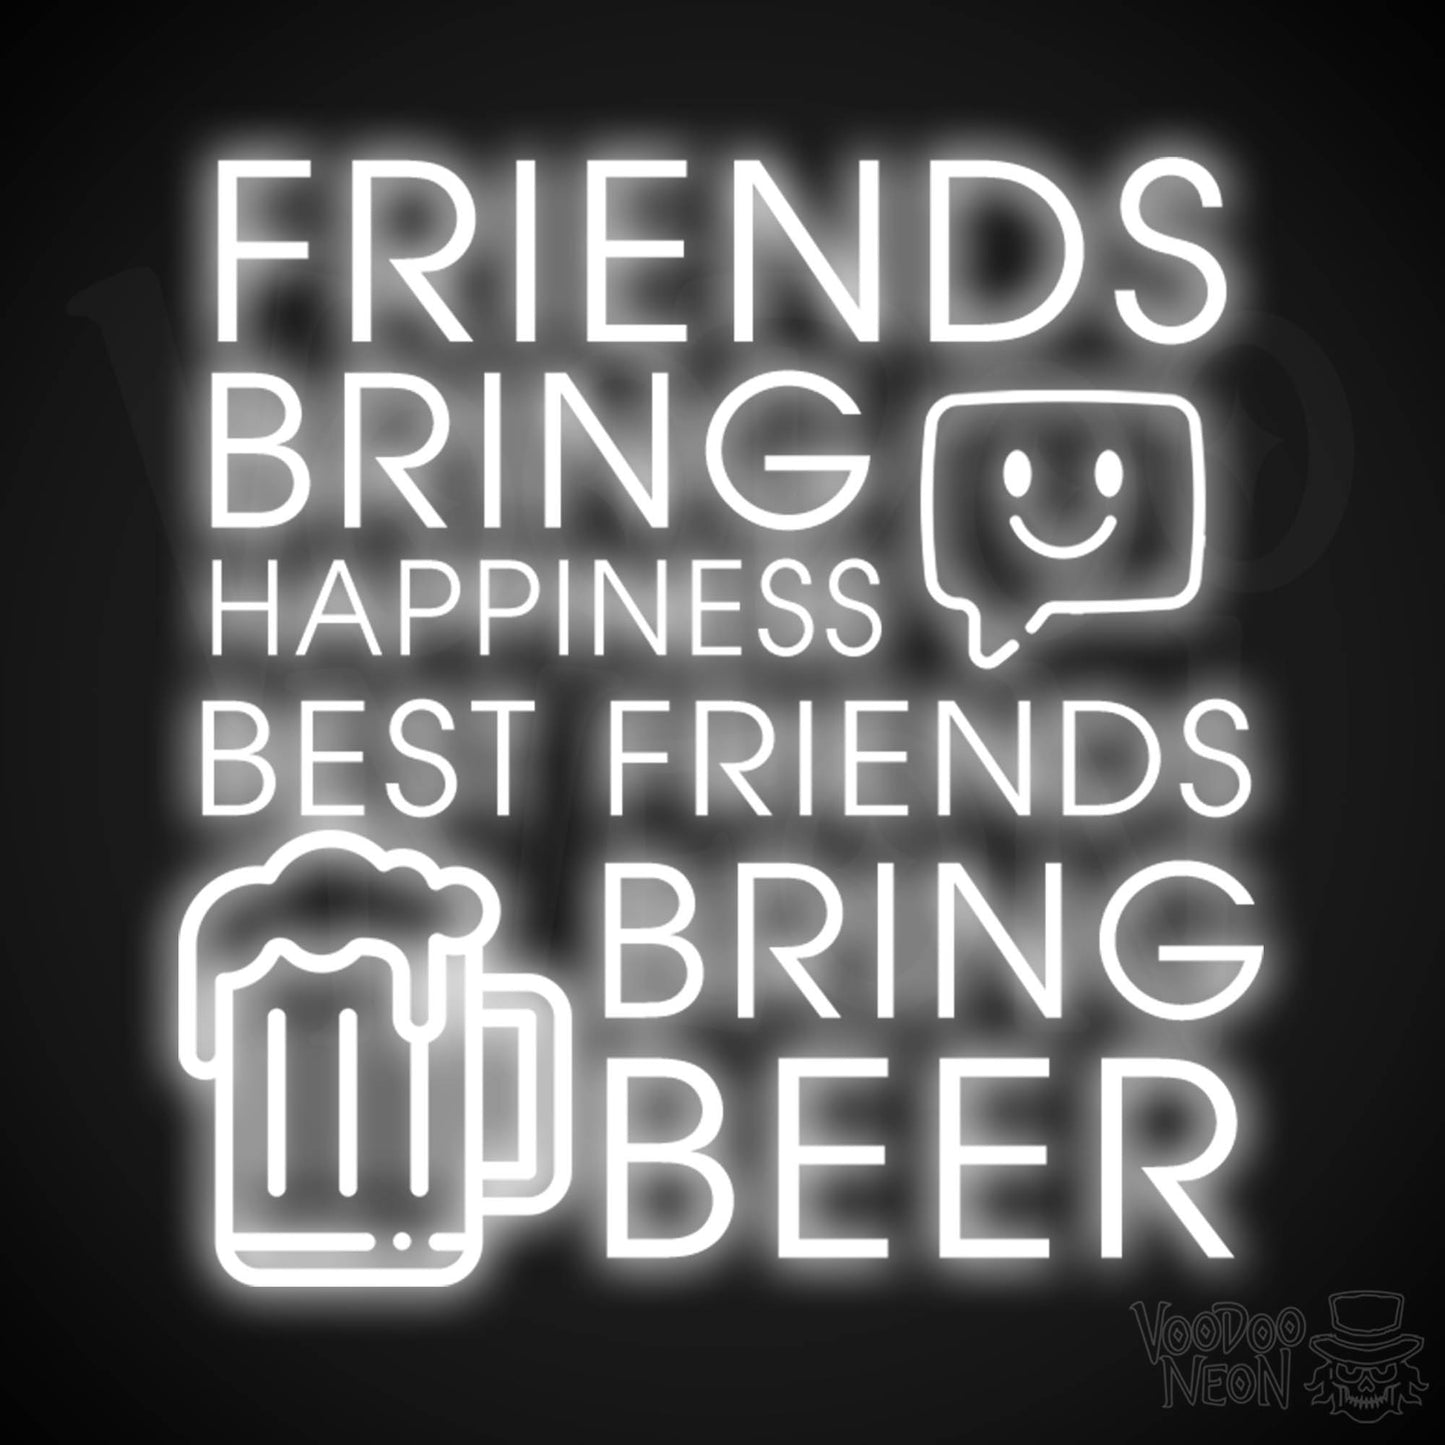 Friends Bring Happiness Best Friends Bring Beer Neon Sign - LED Lights Wall Art - Color White